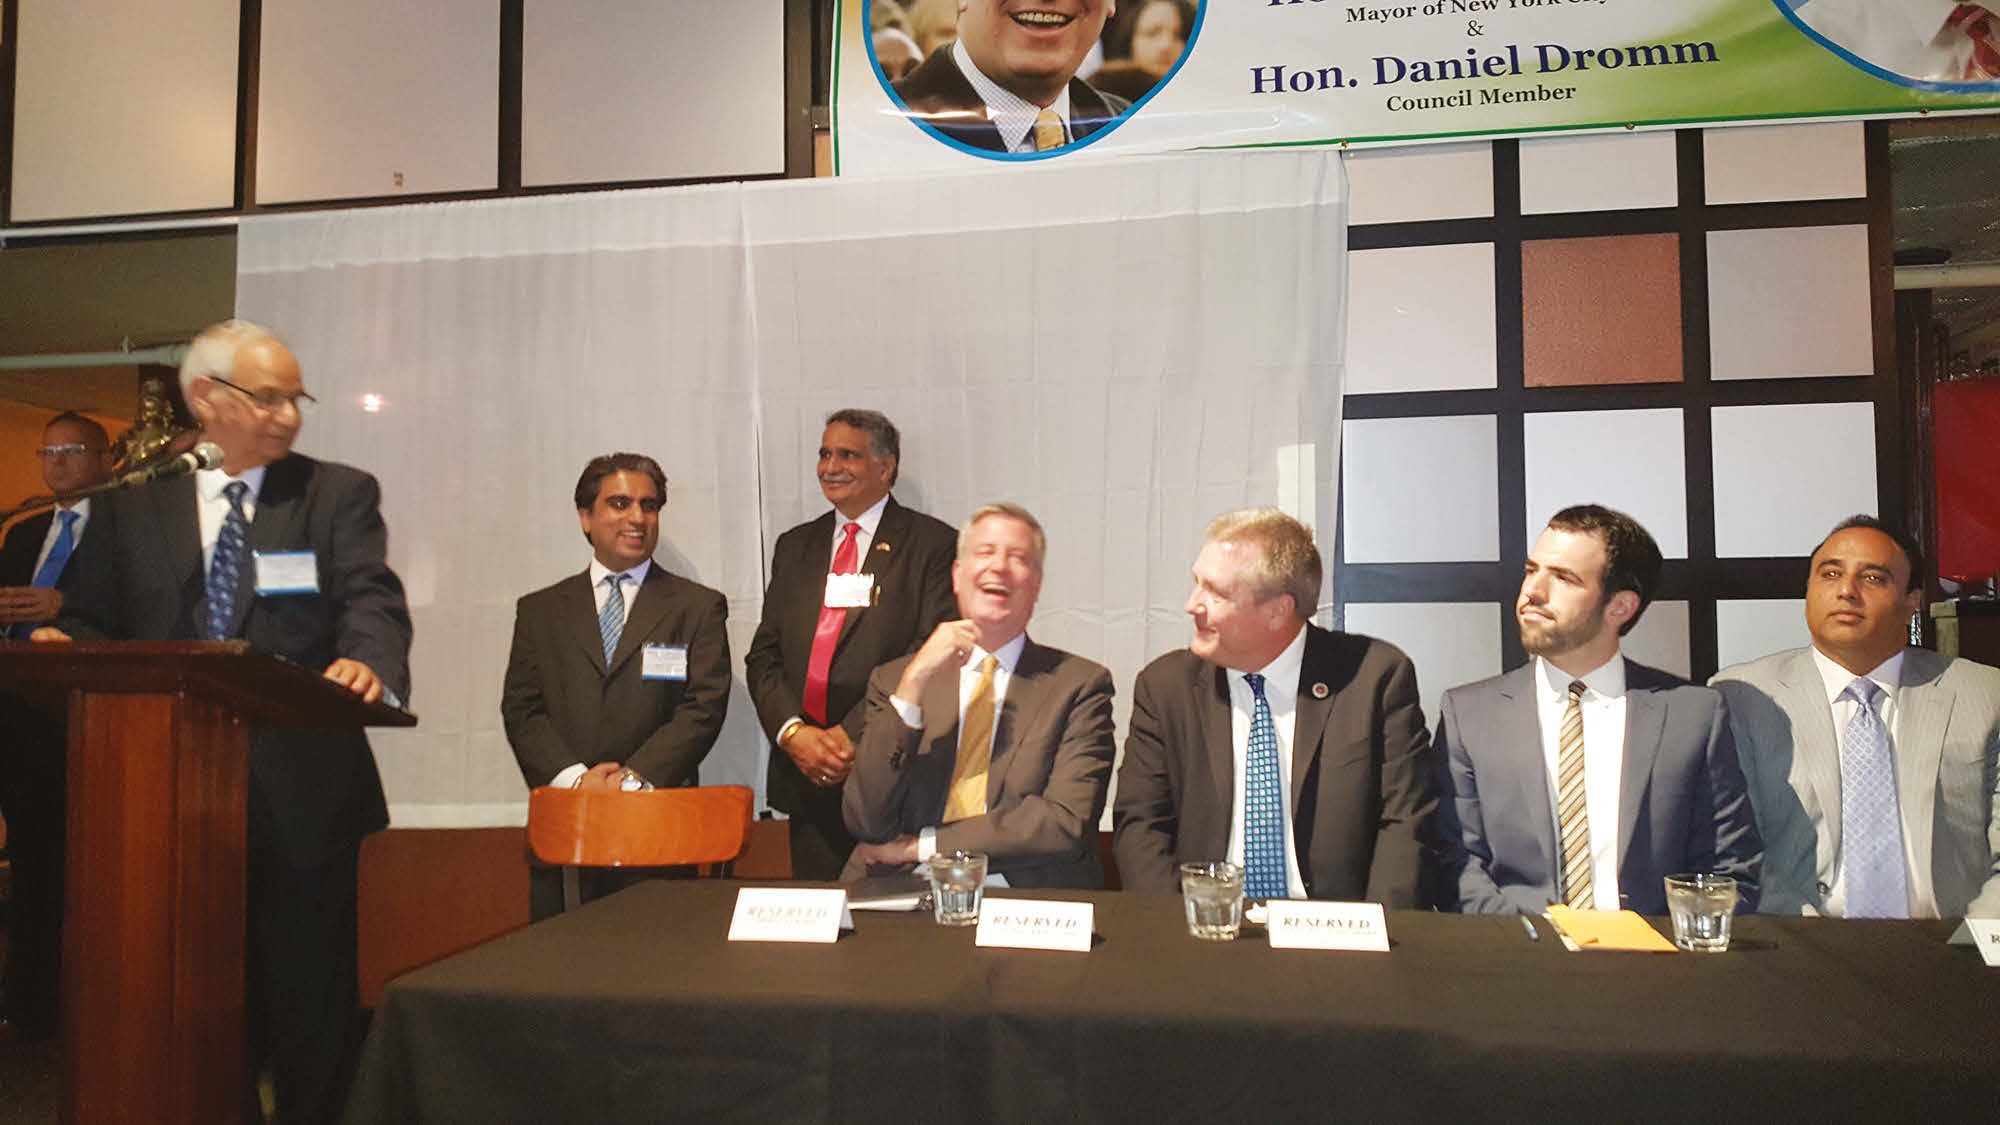 Mayor Bill de Blasio bursts in to laughter at a comment of Mr. Shiv Dass. Also seen are Harry Singh Bolla (extreme right) and Daniel Dromm